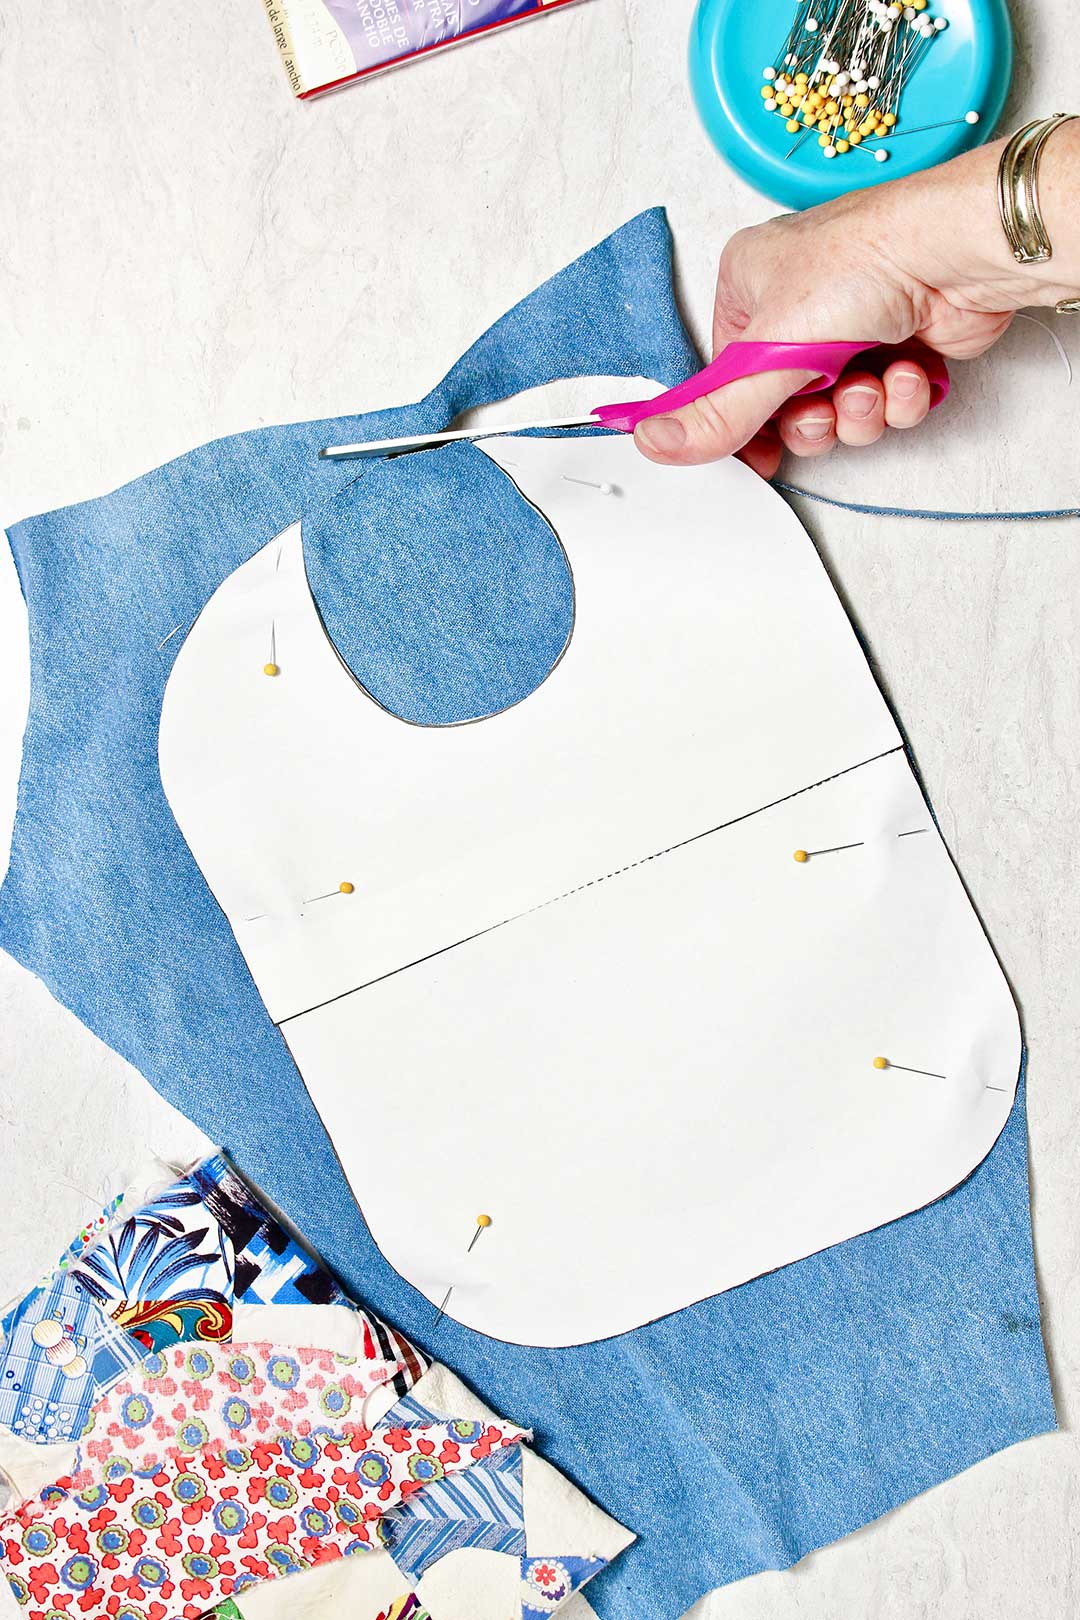 Hand cutting blue fabric for a bib base with white paper pattern pinned on top of it.